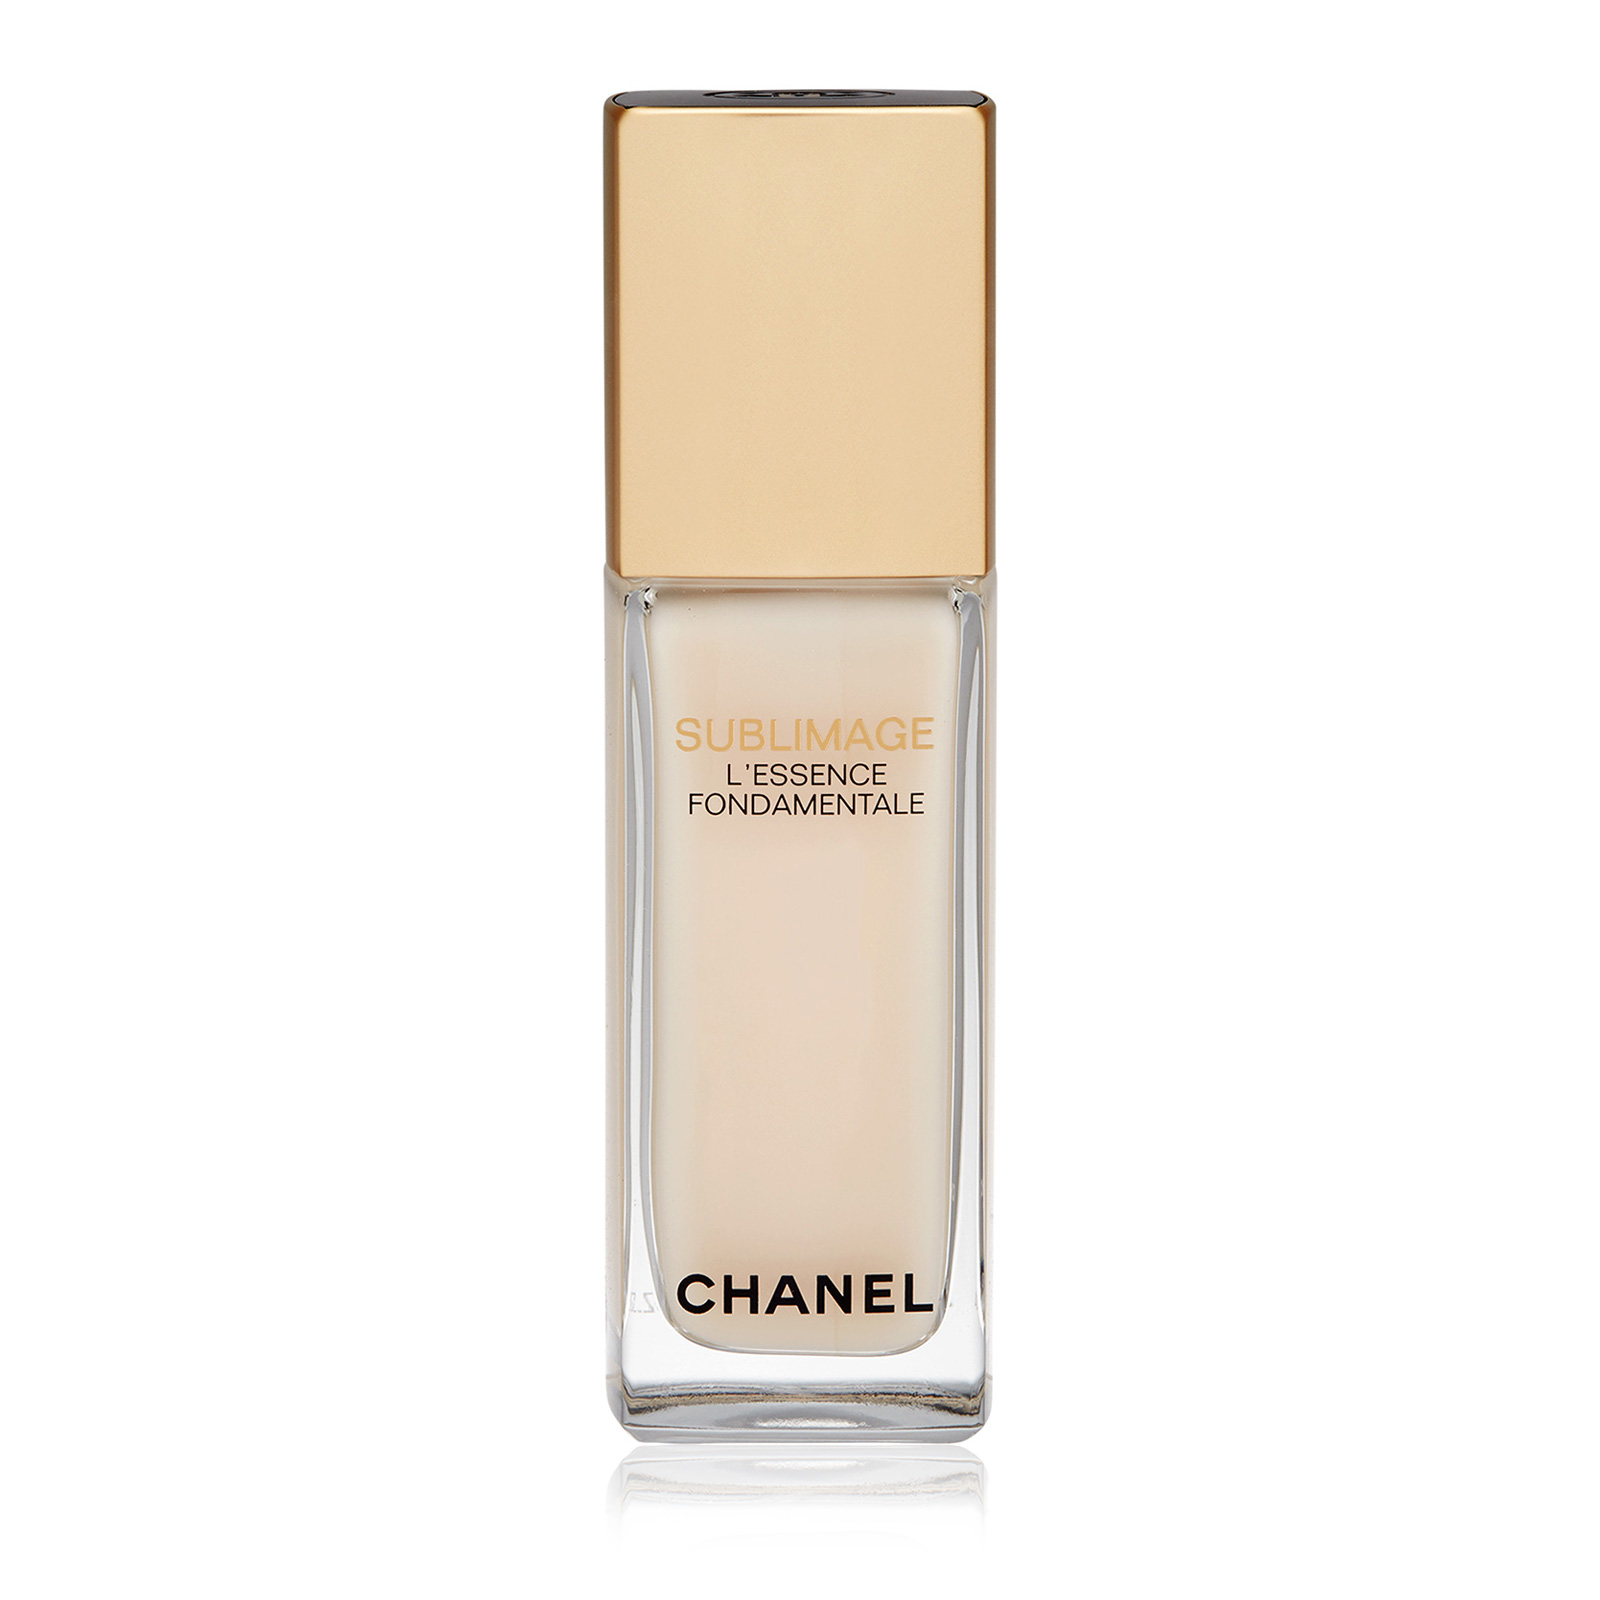 CHANEL, Makeup, Chanel Sublimage Lessence Lumiere Deluxe Sample